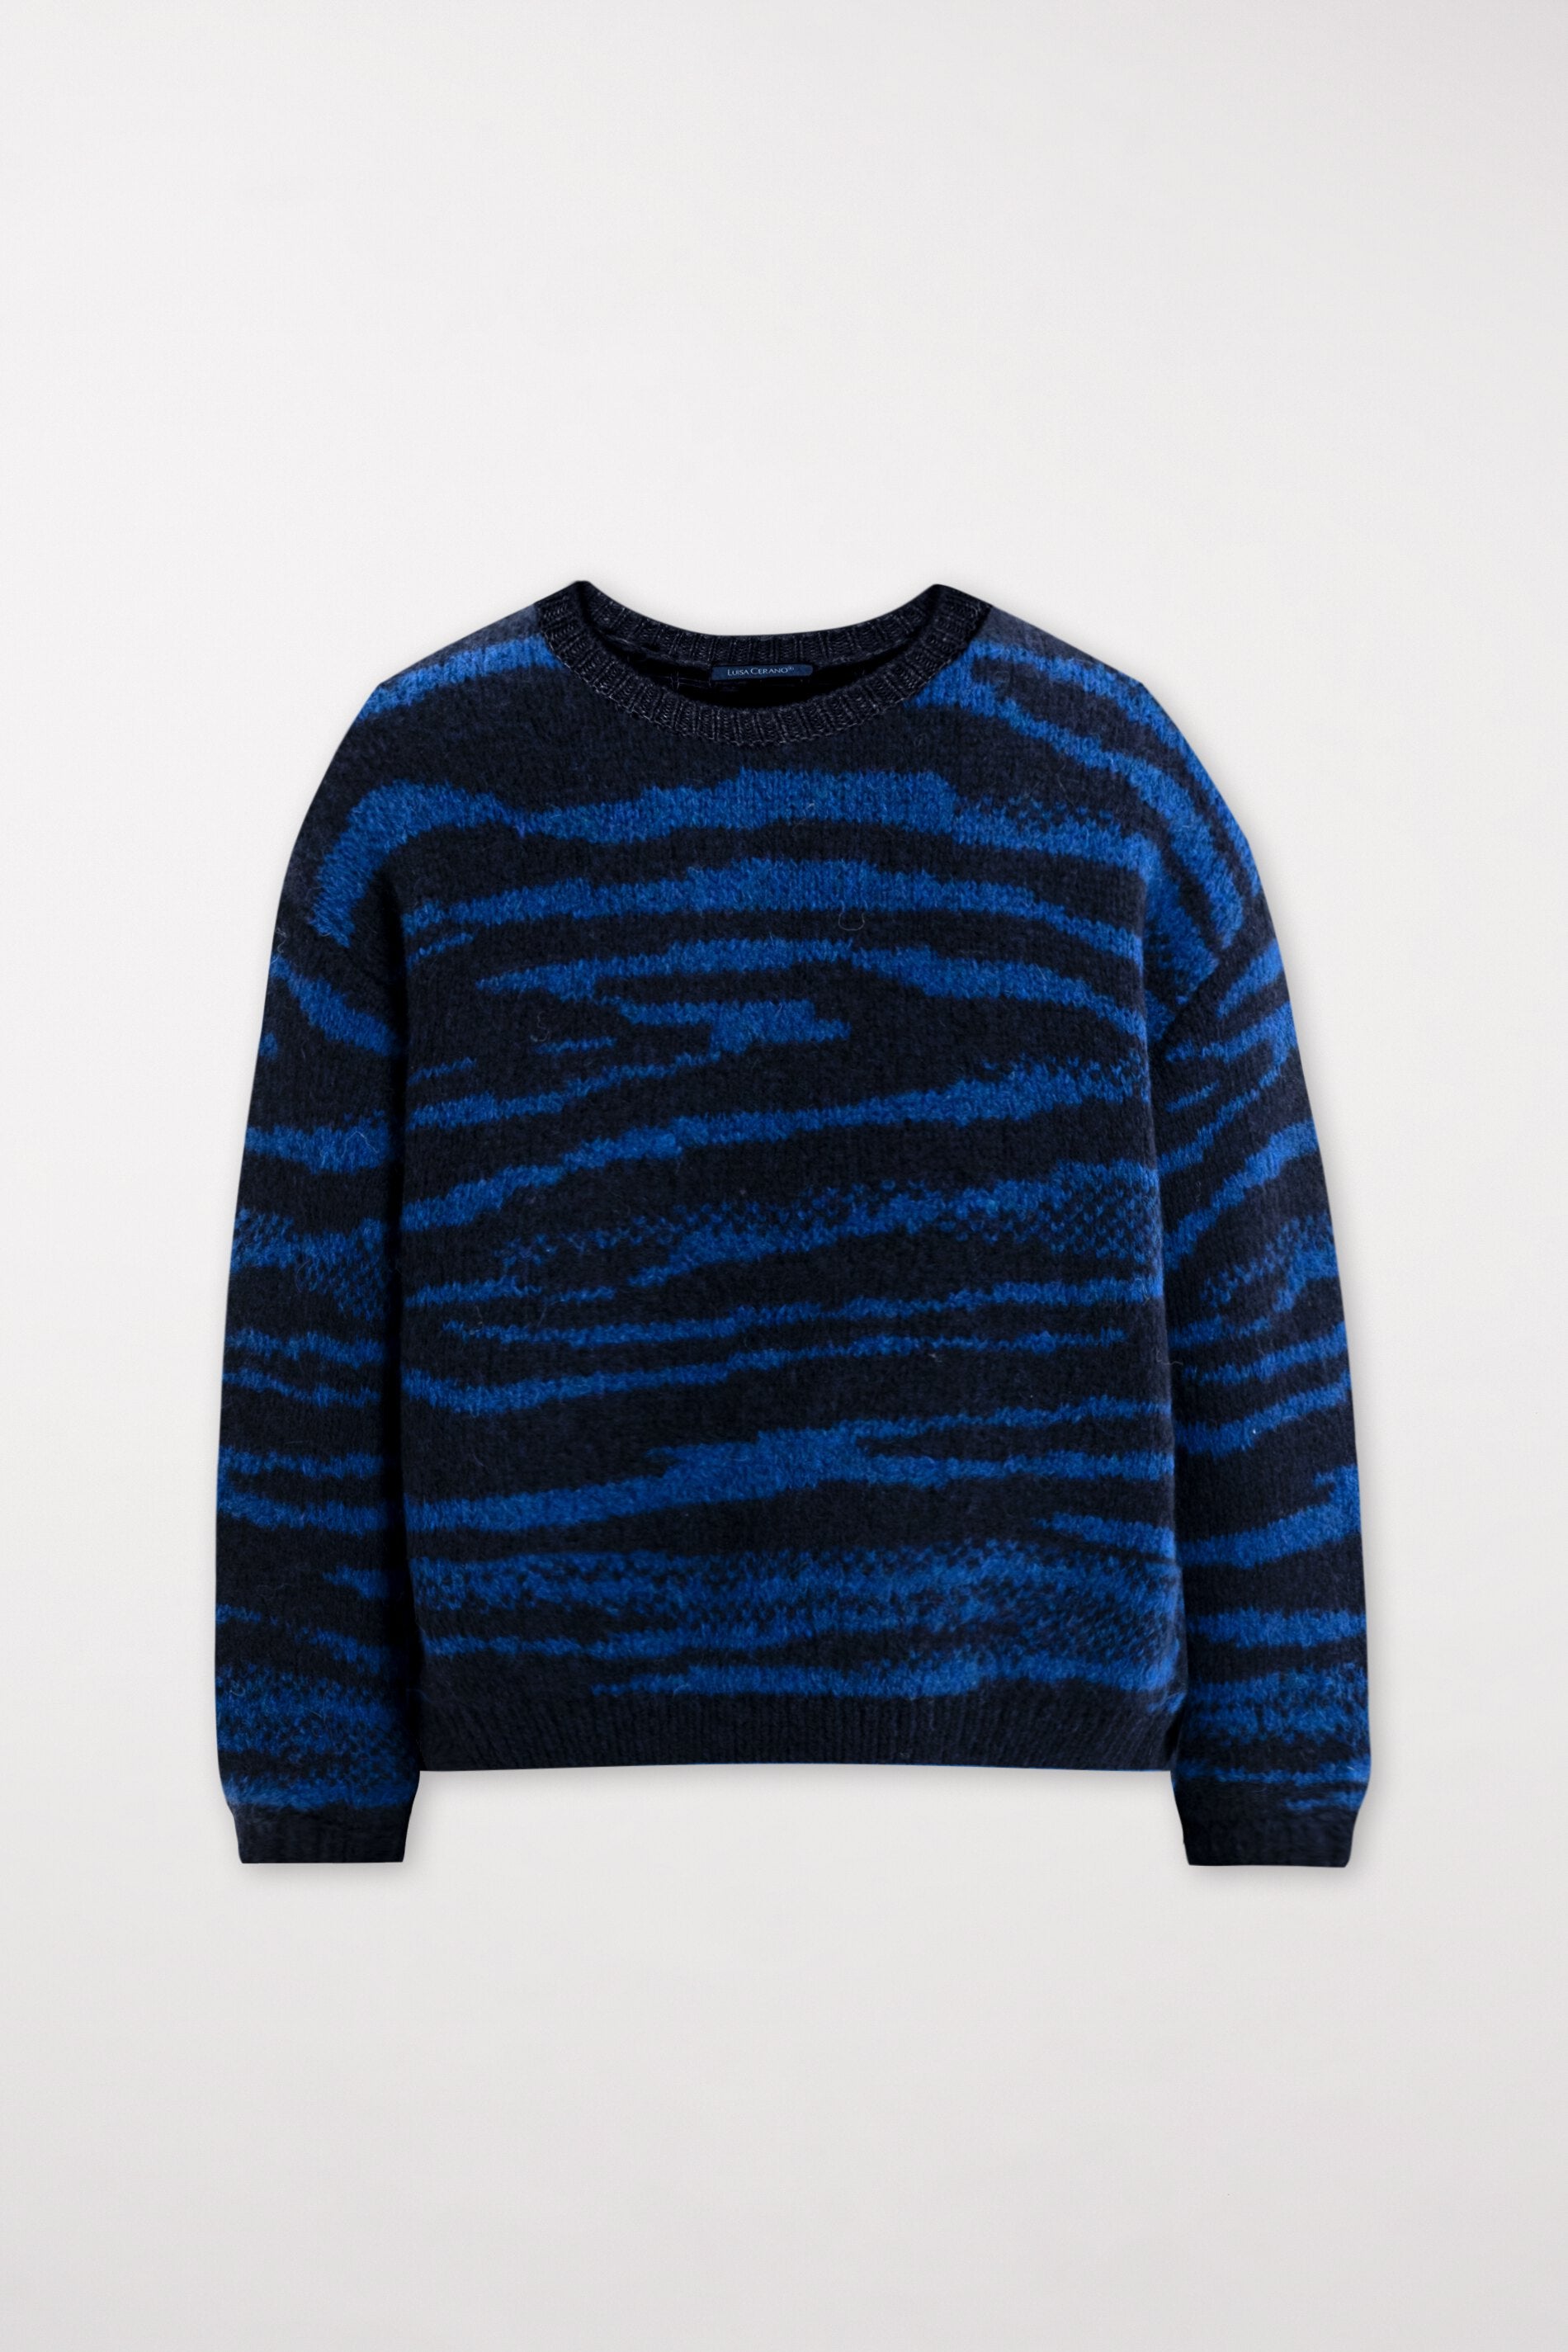 LUISA CERANO-OUTLET-SALE-Pullover in Animal-Jacquard-Strick-34-ultramarine / signal blue-by-ARCHIVIST